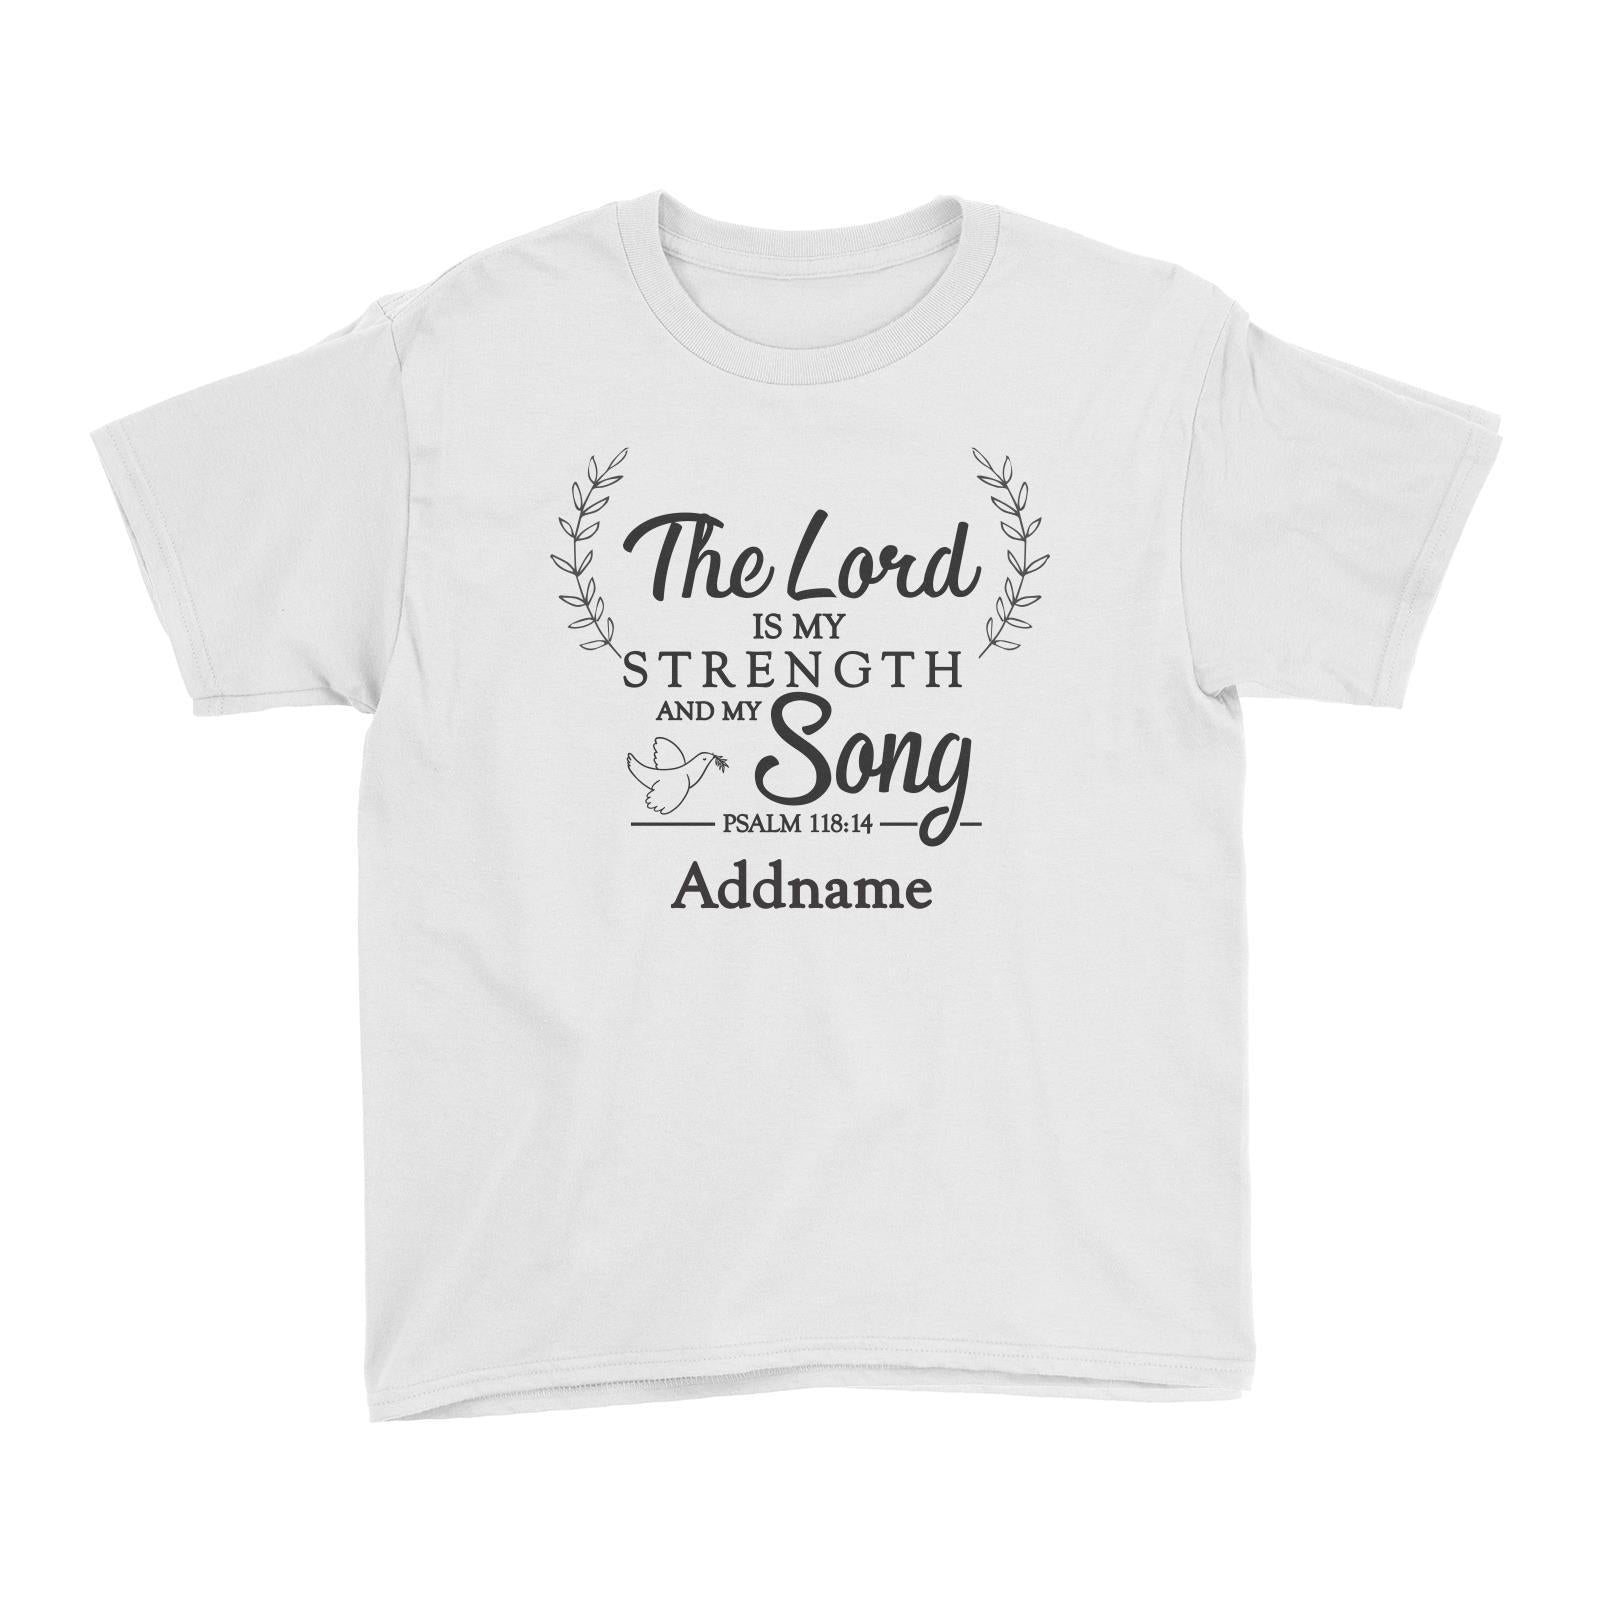 Christian Series The Lord Is My Strength Song Psalm 118.14 Addname Kid's T-Shirt